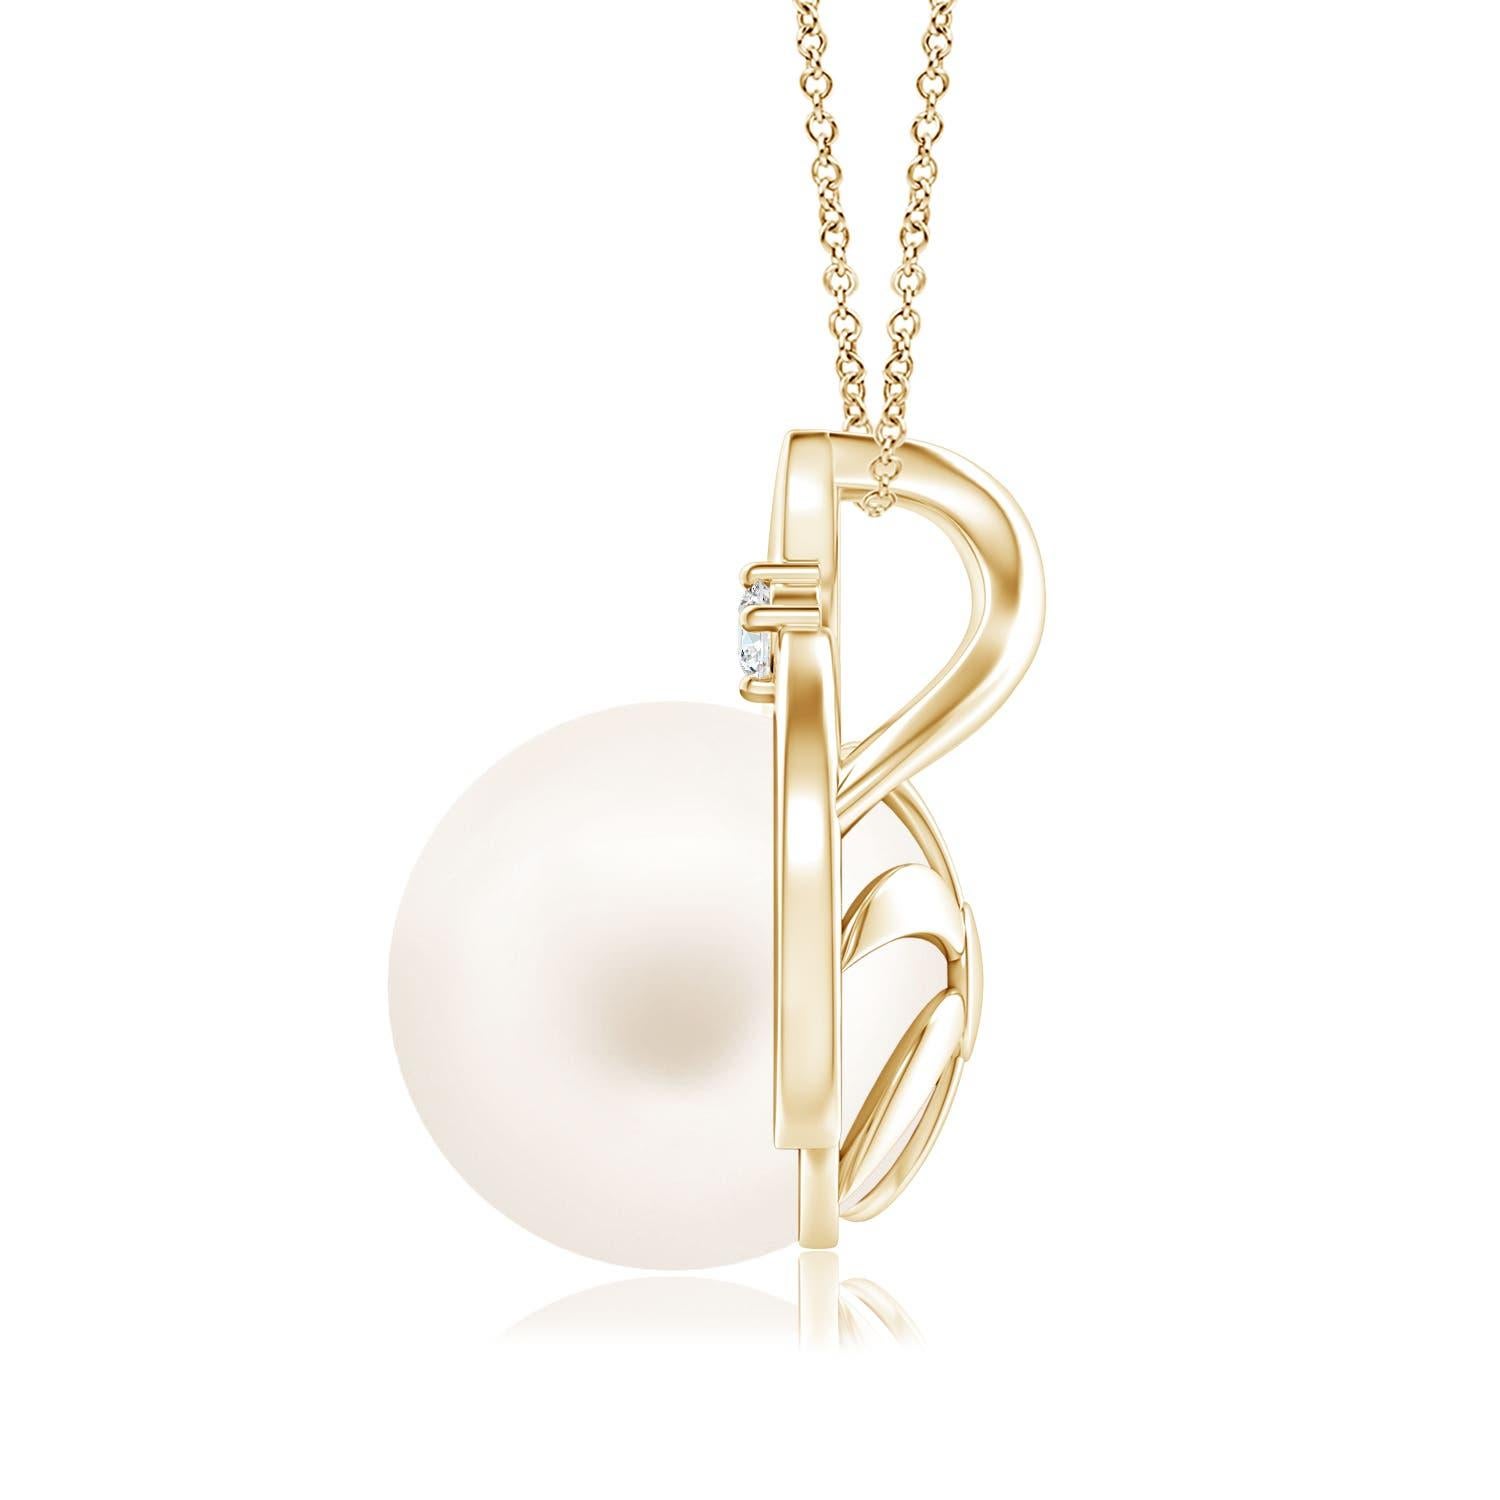 A modern take on the vintage wishbone pattern, this pearl pendant necklace in 14K yellow gold is designed to evoke an old-world charm. The intricately set Freshwater cultured pearl looks breathtakingly beautiful. Uniquely designed bale lends a touch